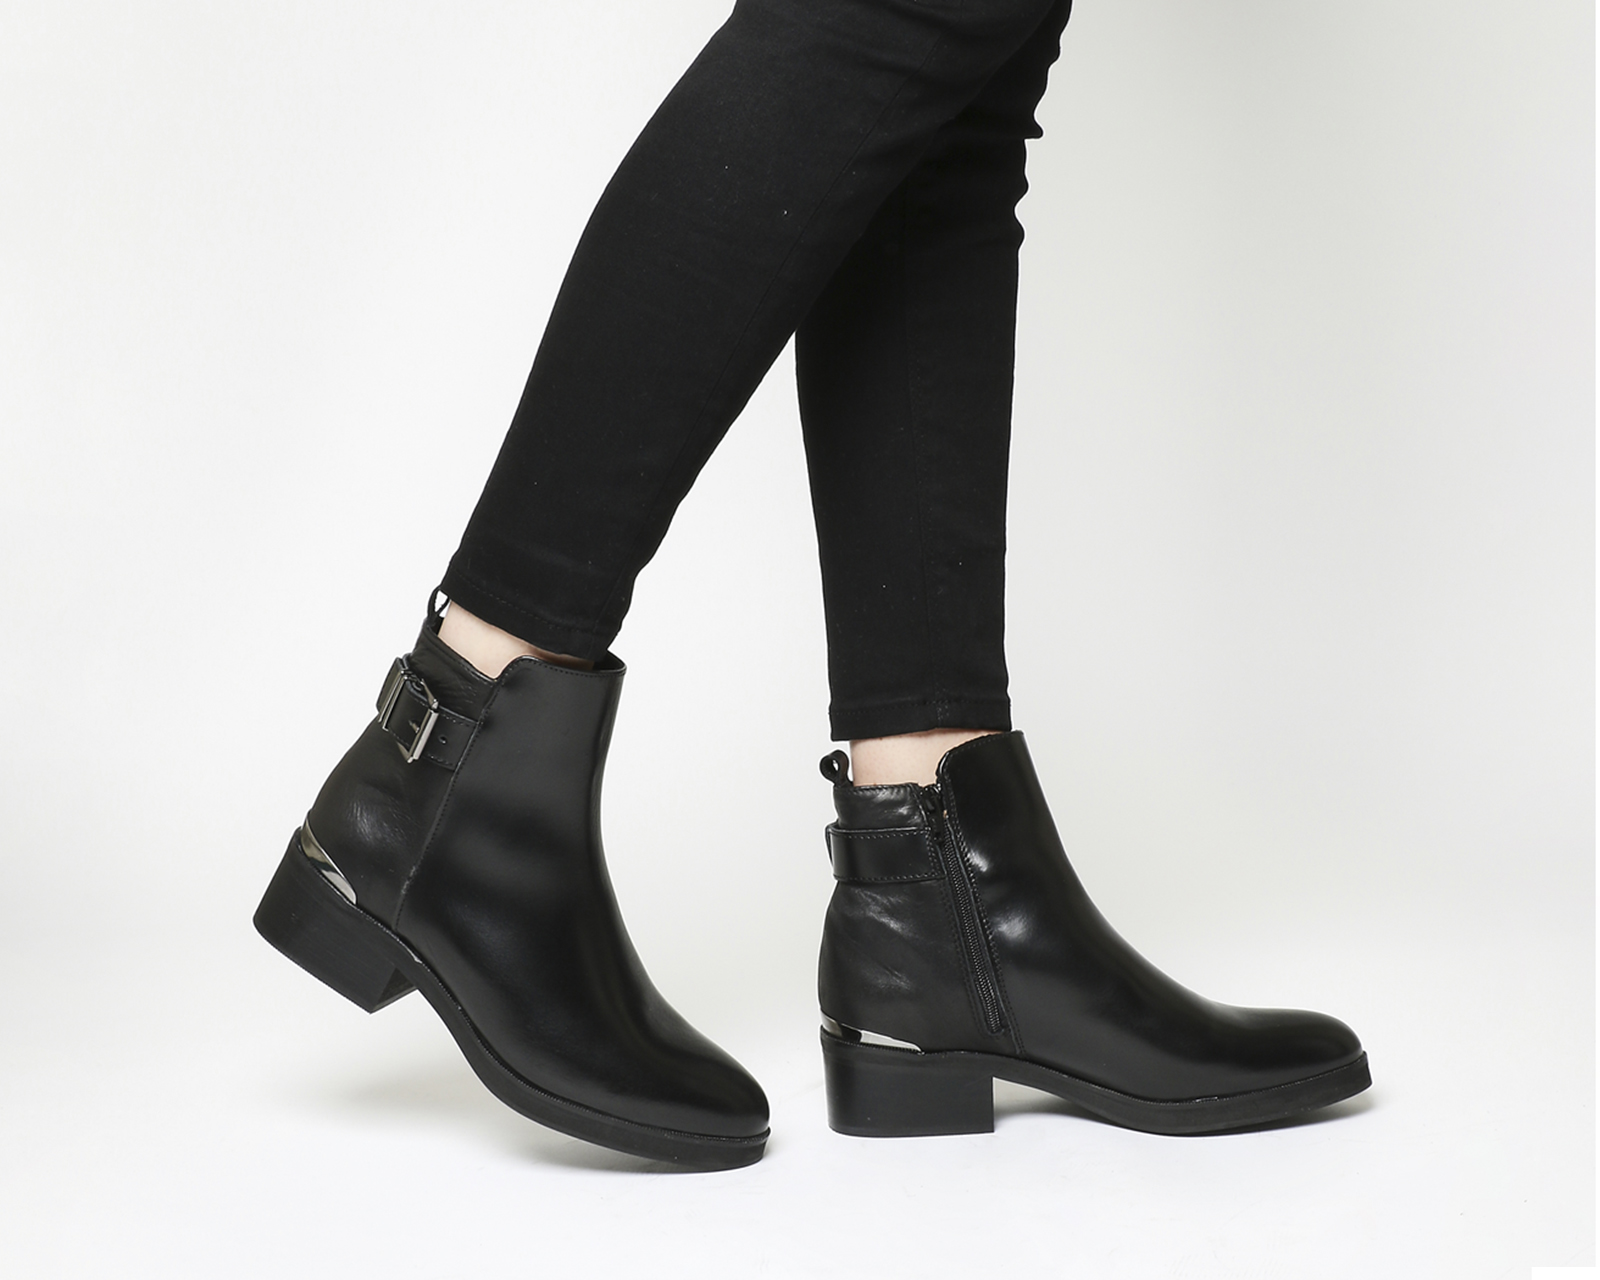 OFFICEInnovate Strap Ankle BootsBlack Box Leather